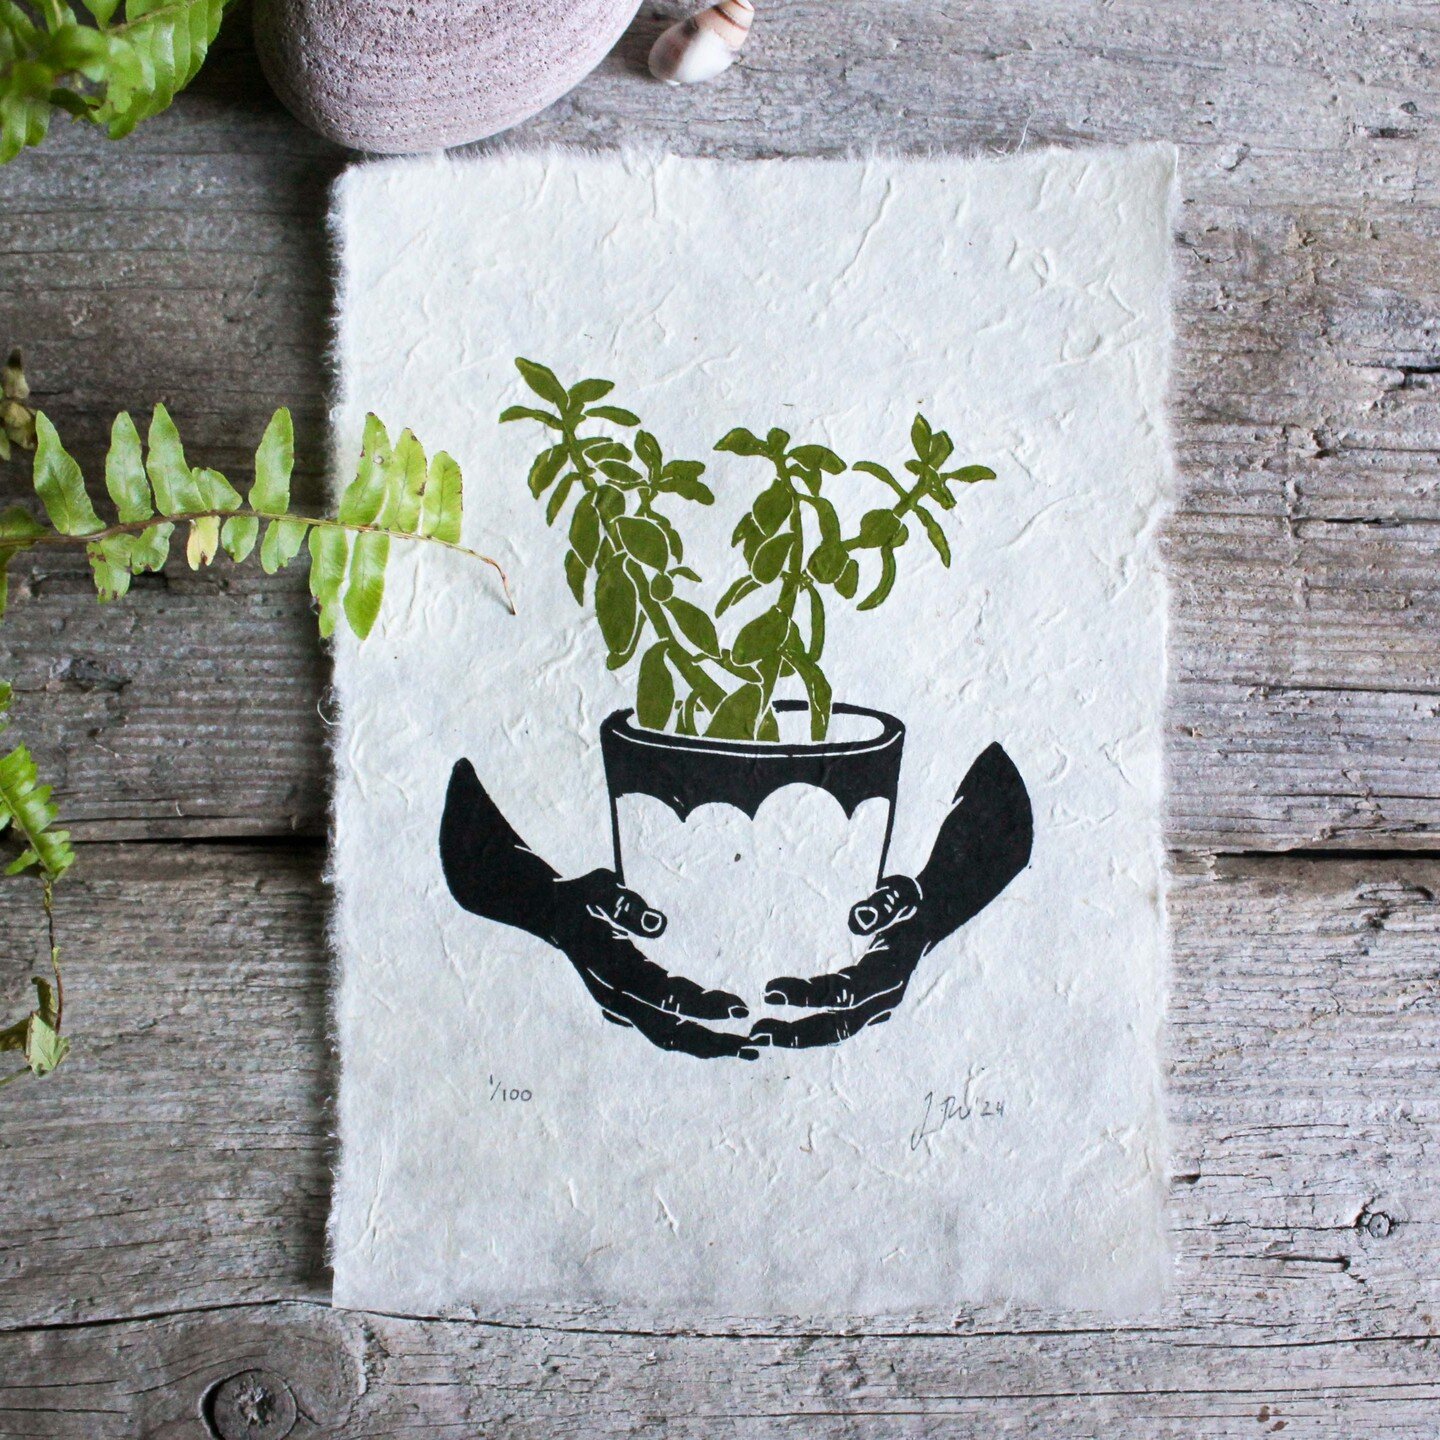 The third print of my house plant series is now available on my Etsy shop too. 
.
.
.
.
.
.
.
#printmaker #linocutprint #linocut #linocutting #linocarving #printmakersofinstagram #irishhandmade #irishmade #reliefcarving #handcarvedstamp #reliefprinti